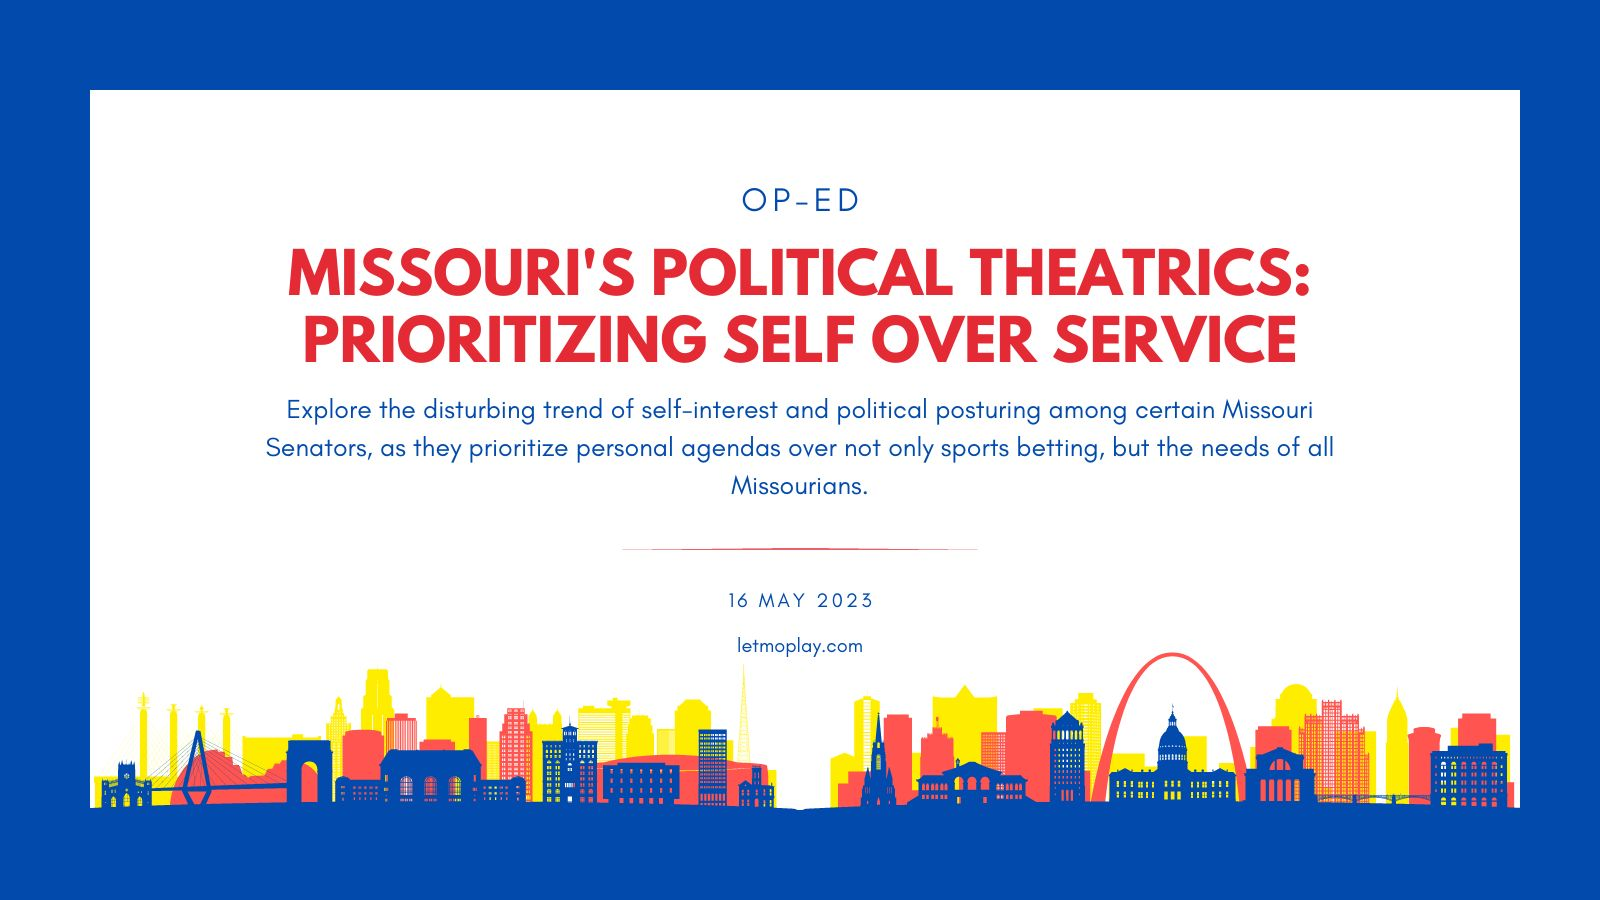 Share creative with the article title, 'Missouri's Political Theatrics: Prioritizing Self Over Service' in bold text on a white background with blue text and a blue frame around the outside of the image